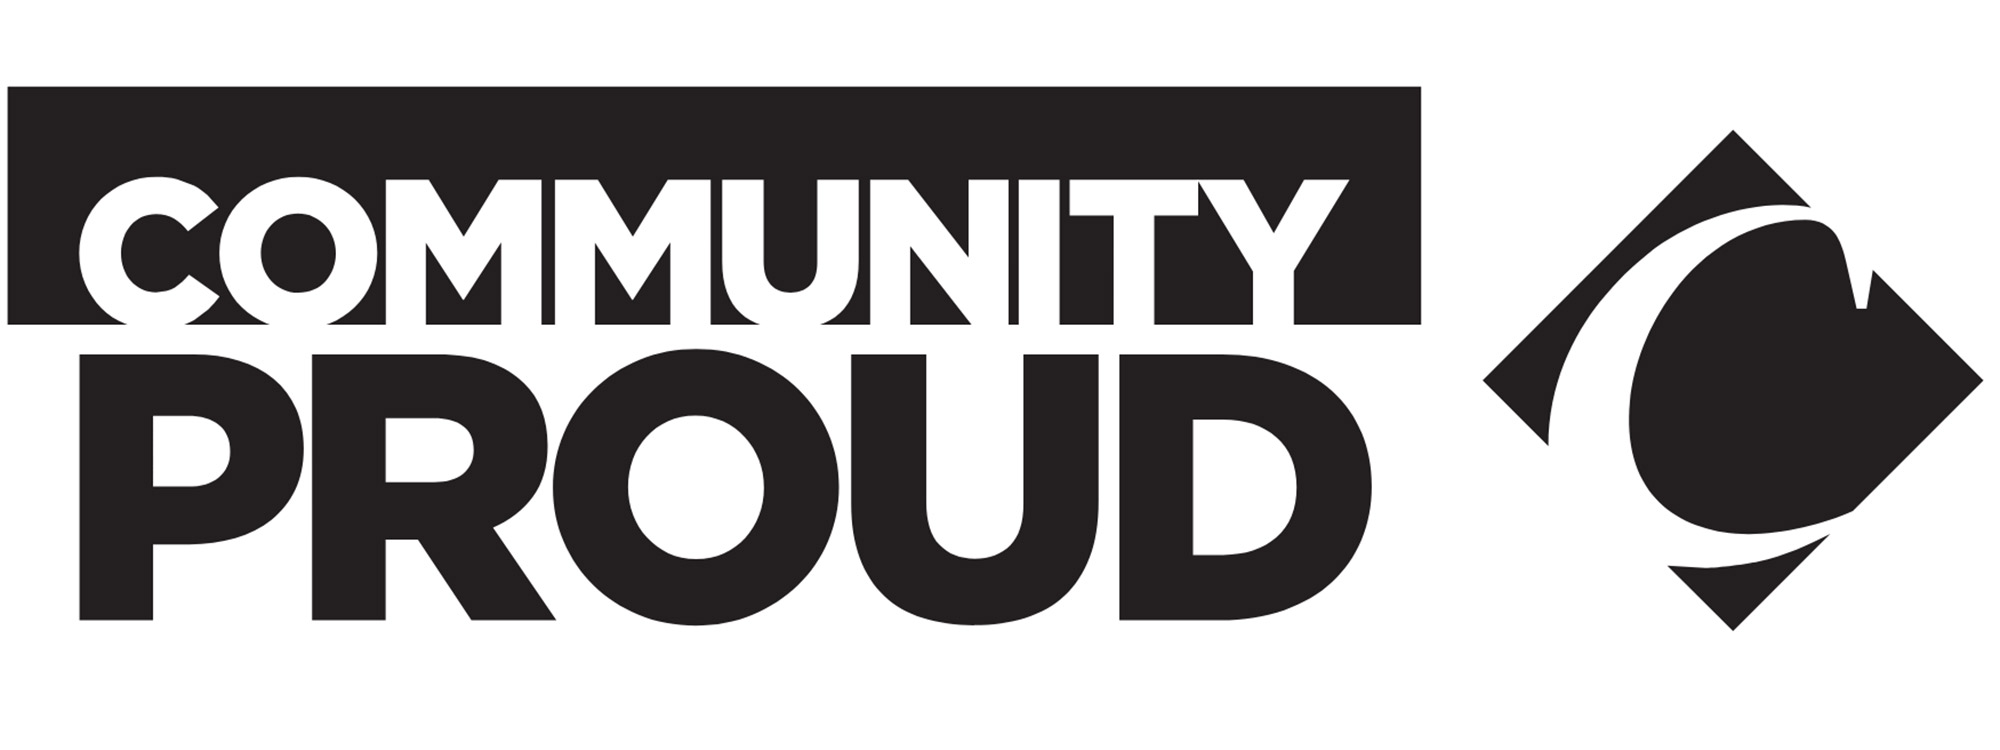 Community Proud logo in black and white